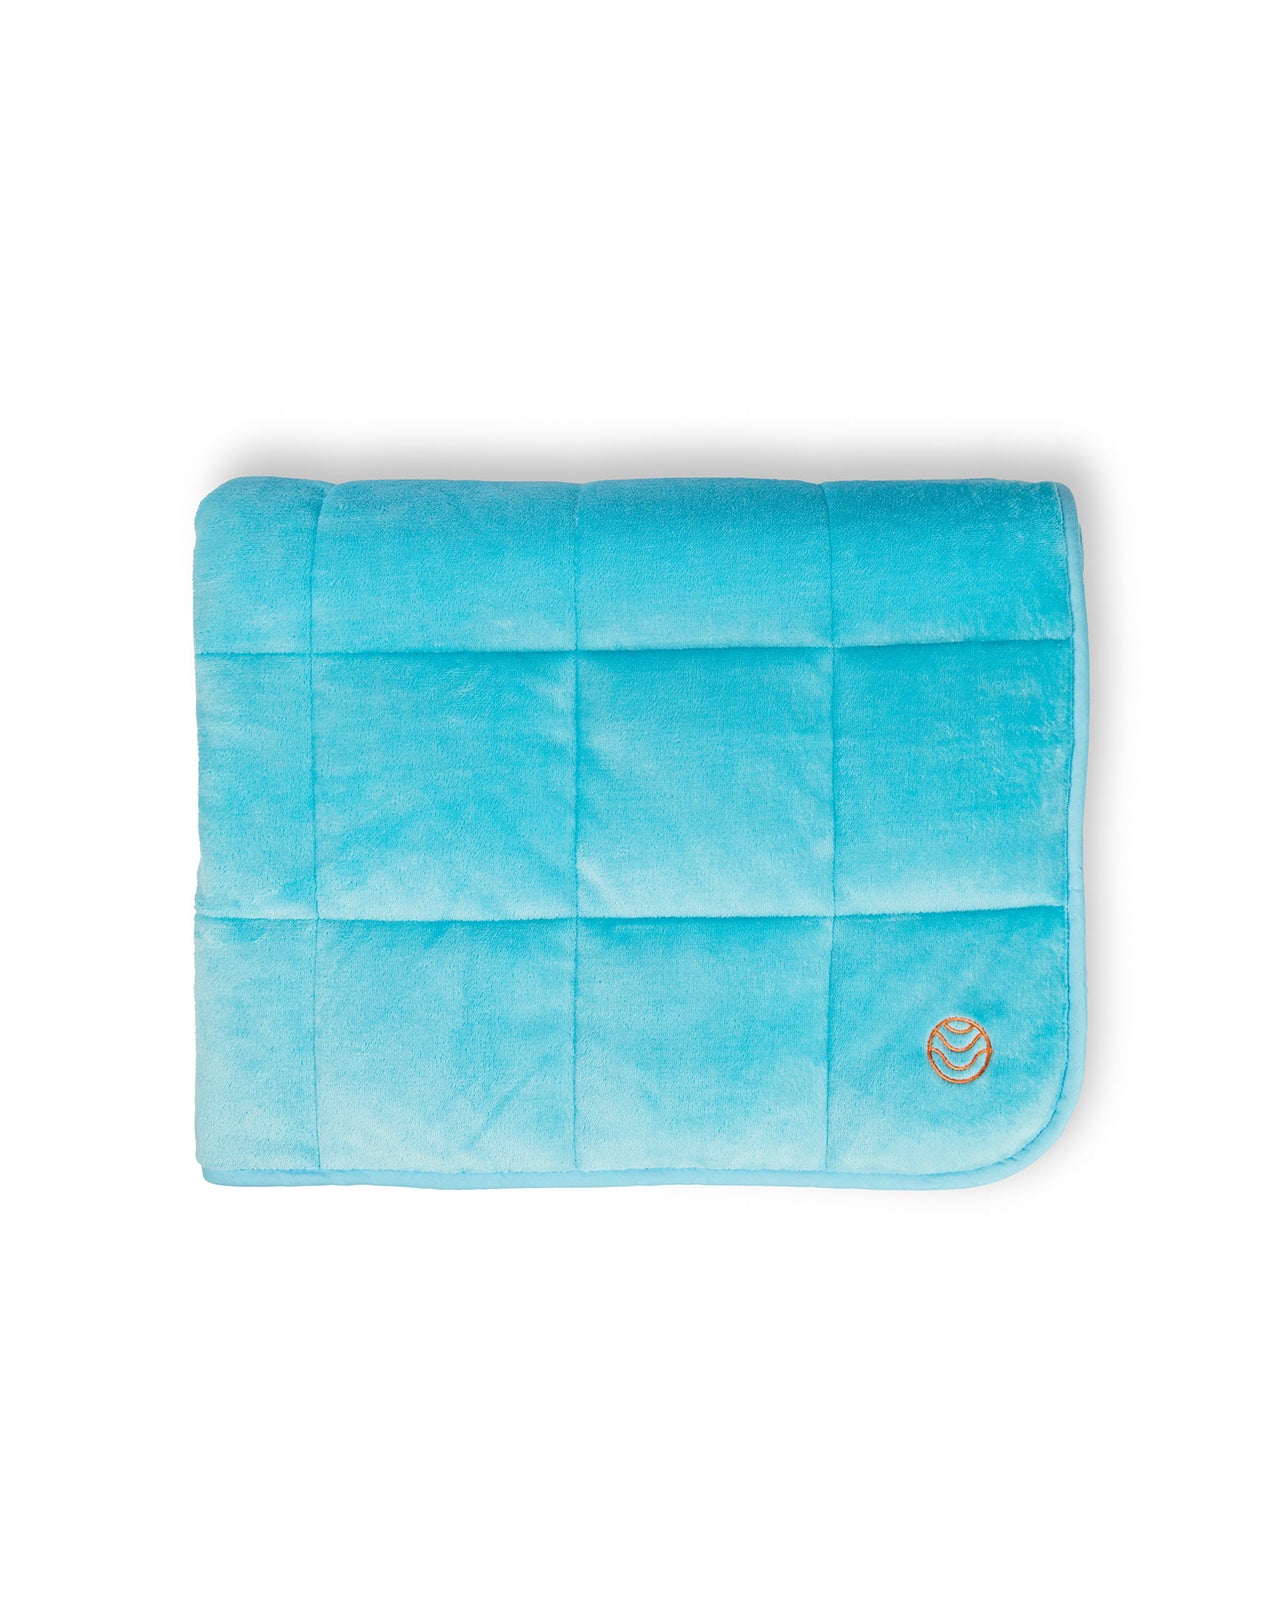 Thera Weighted Blanket - Relaxing Aqua